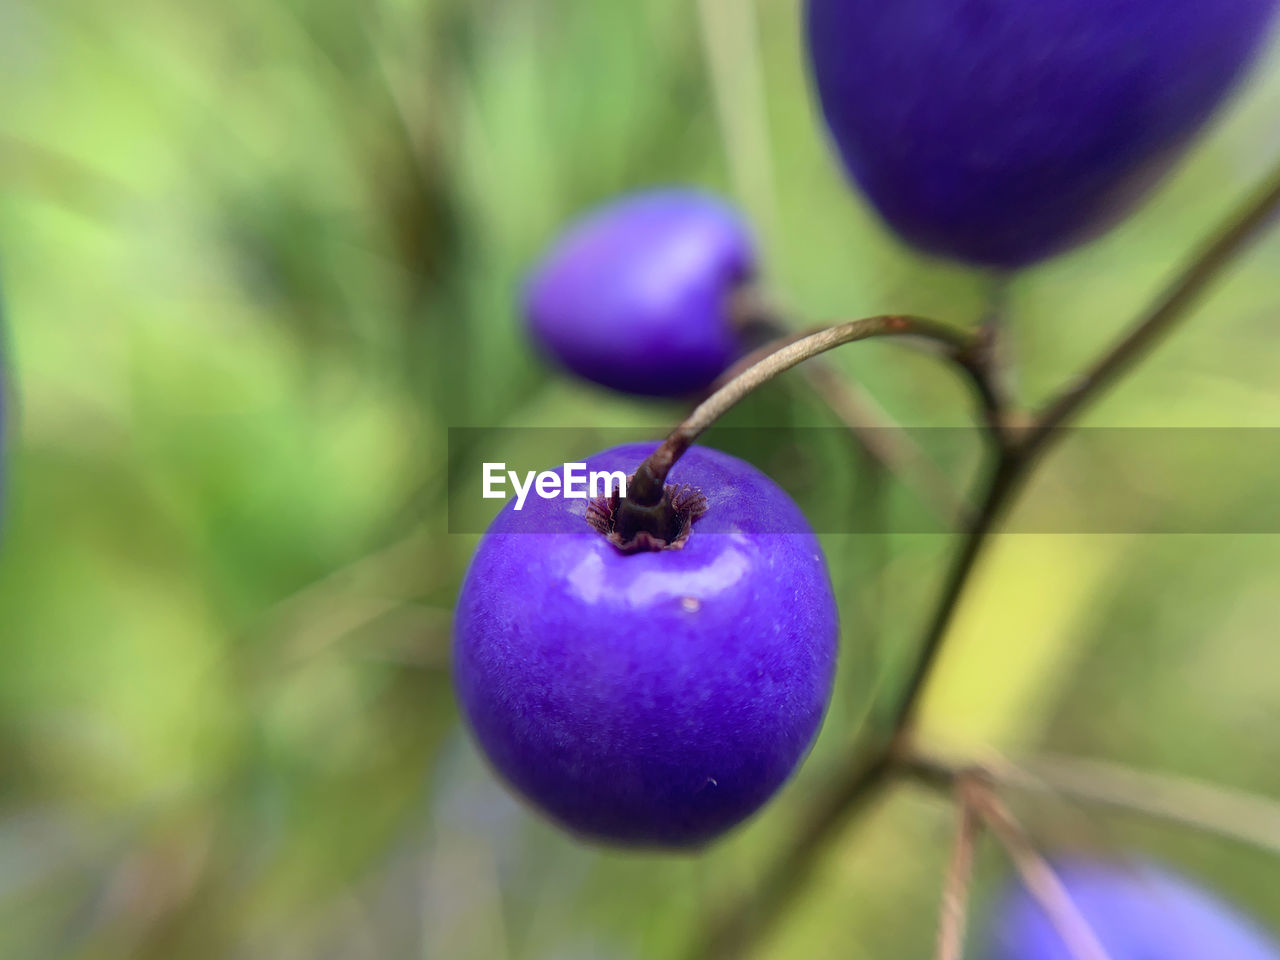 food, food and drink, fruit, healthy eating, flower, purple, plant, freshness, close-up, macro photography, produce, nature, wellbeing, focus on foreground, berry, bilberry, no people, tree, growth, branch, green, selective focus, blossom, outdoors, blue, day, agriculture, ripe, huckleberry, beauty in nature, plant part, leaf